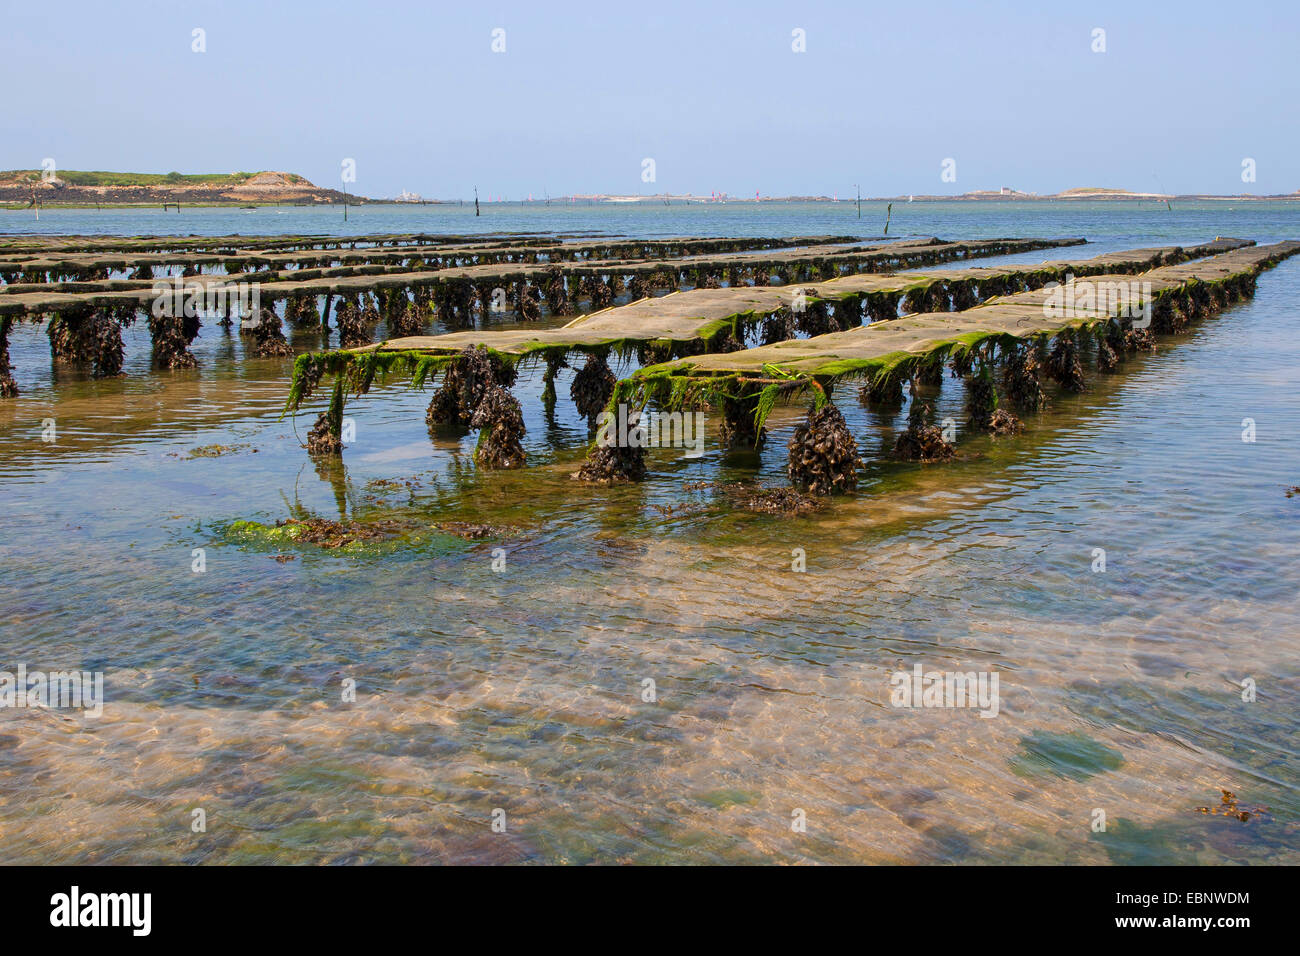 Pacific oyster, giant Pacific oyster, Japanese oyster (Crassostrea gigas, Crassostrea pacifica), oyster farming, racks with oysters in net bags at ebb tide, France, Brittany Stock Photo